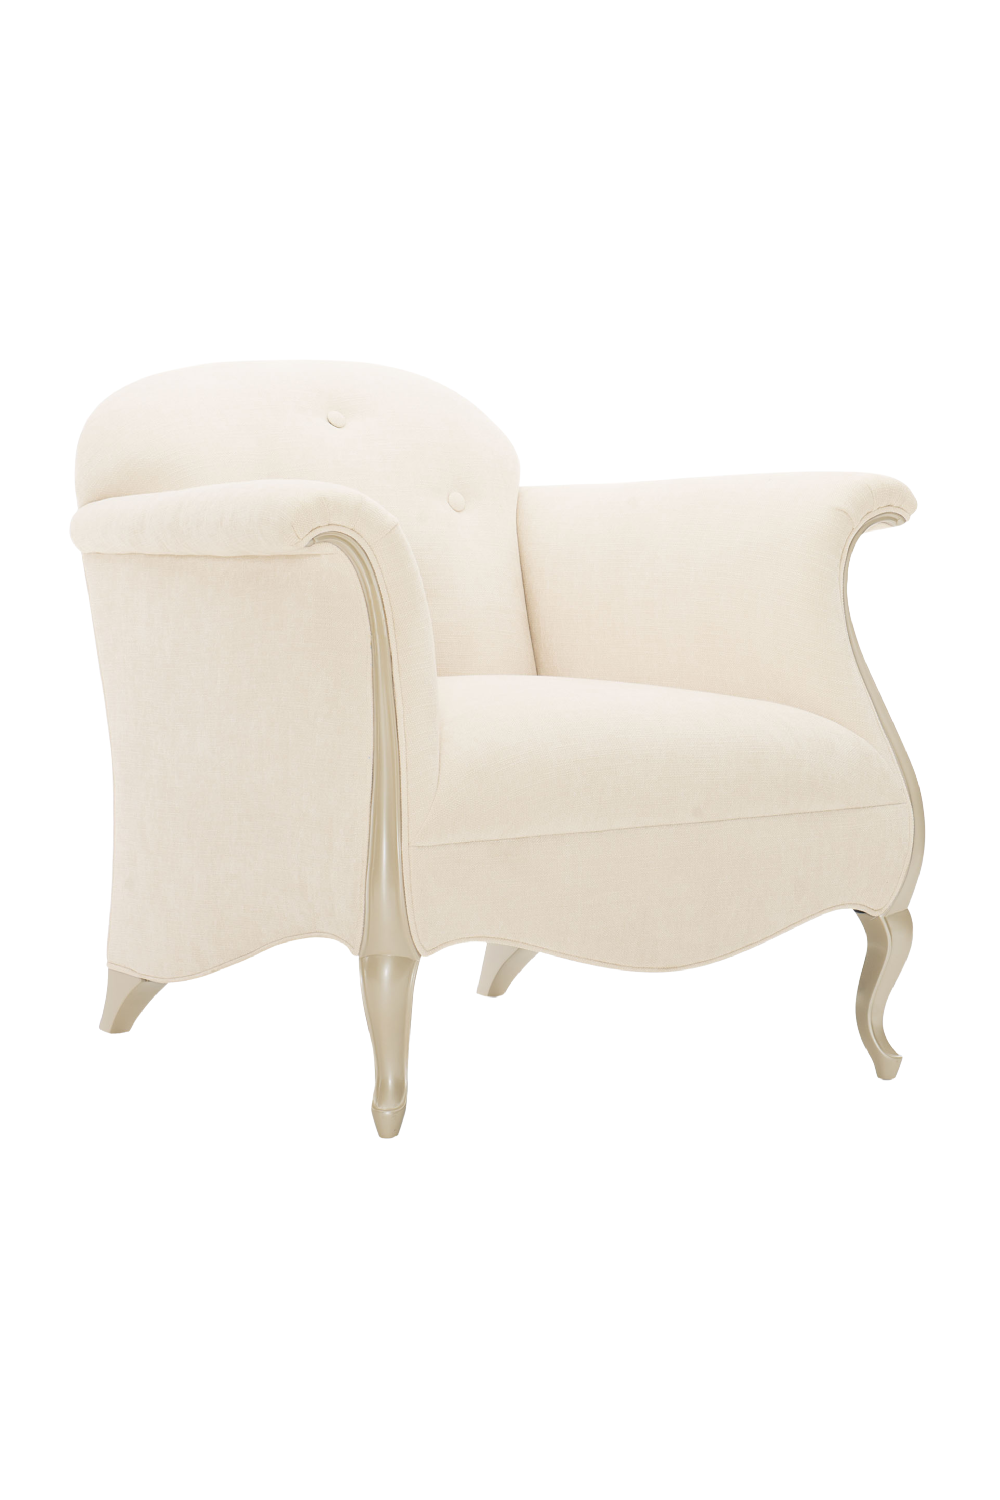 Scrolled Arms Accent Chair | Caracole Two To Tango | Oroa.com